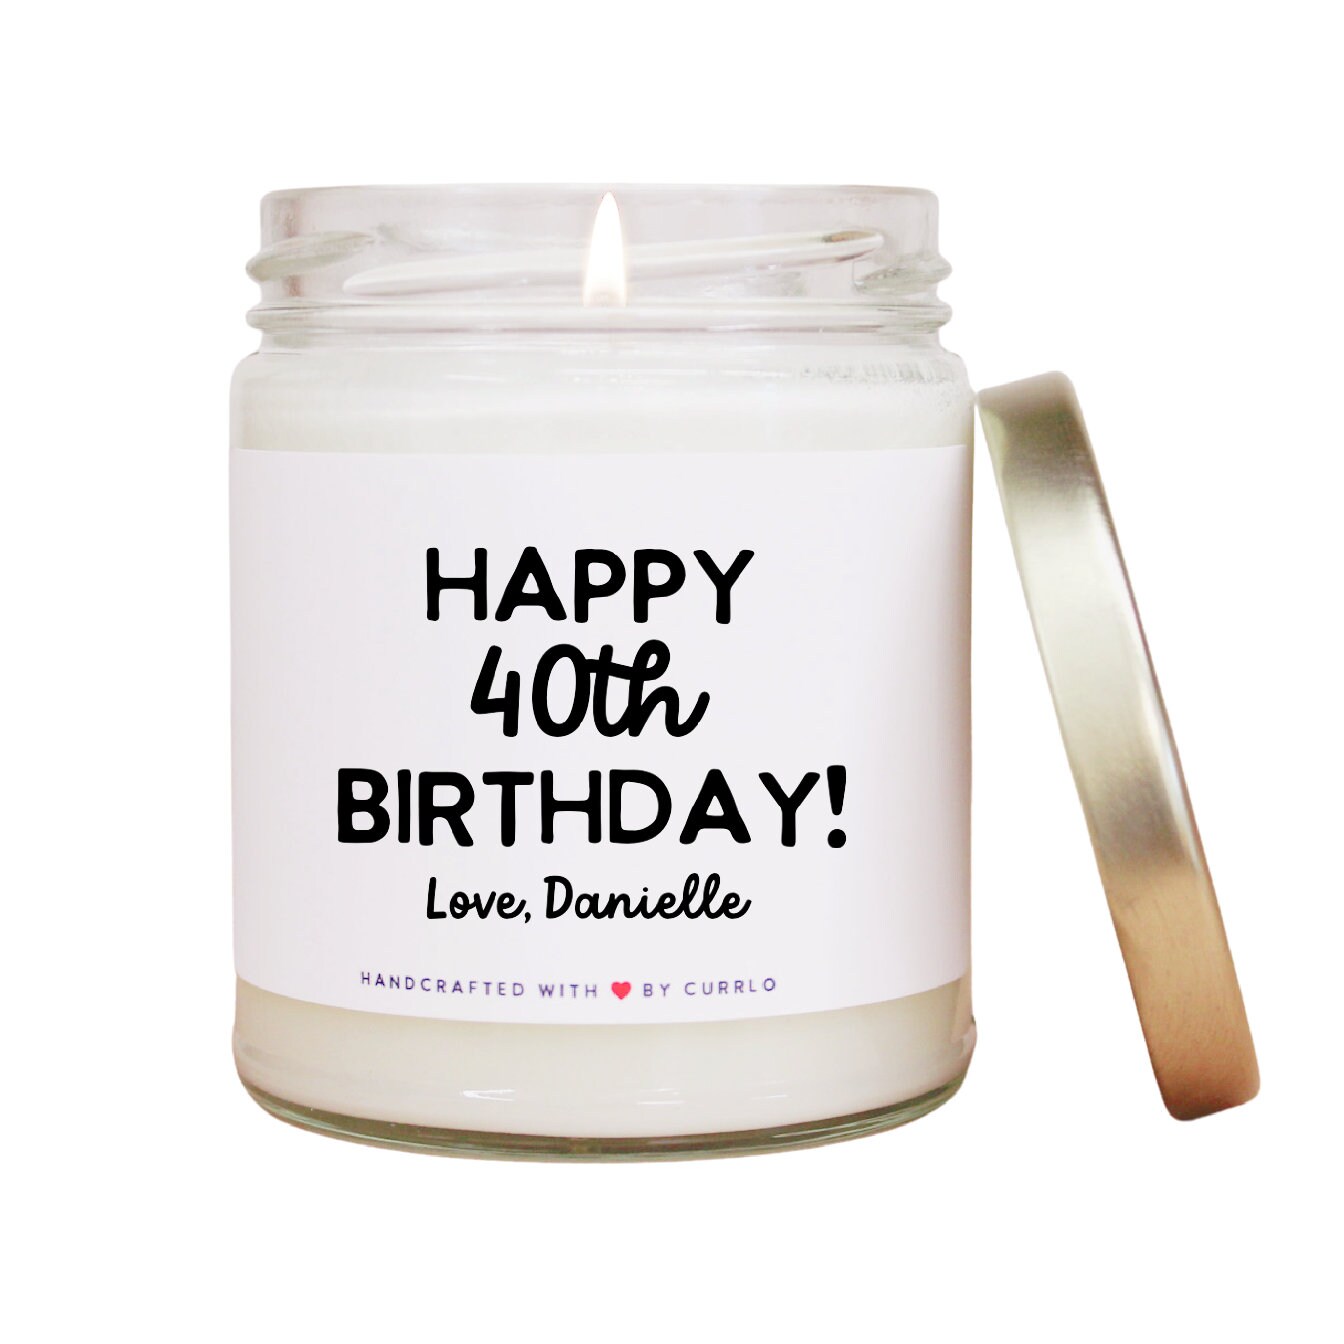 Discover Happy 40th Birthday Gift - 1983 Birthday - Customize Gift for Birthday - Personalized Candle - Unique Personalized Birthday Gifts - Candles